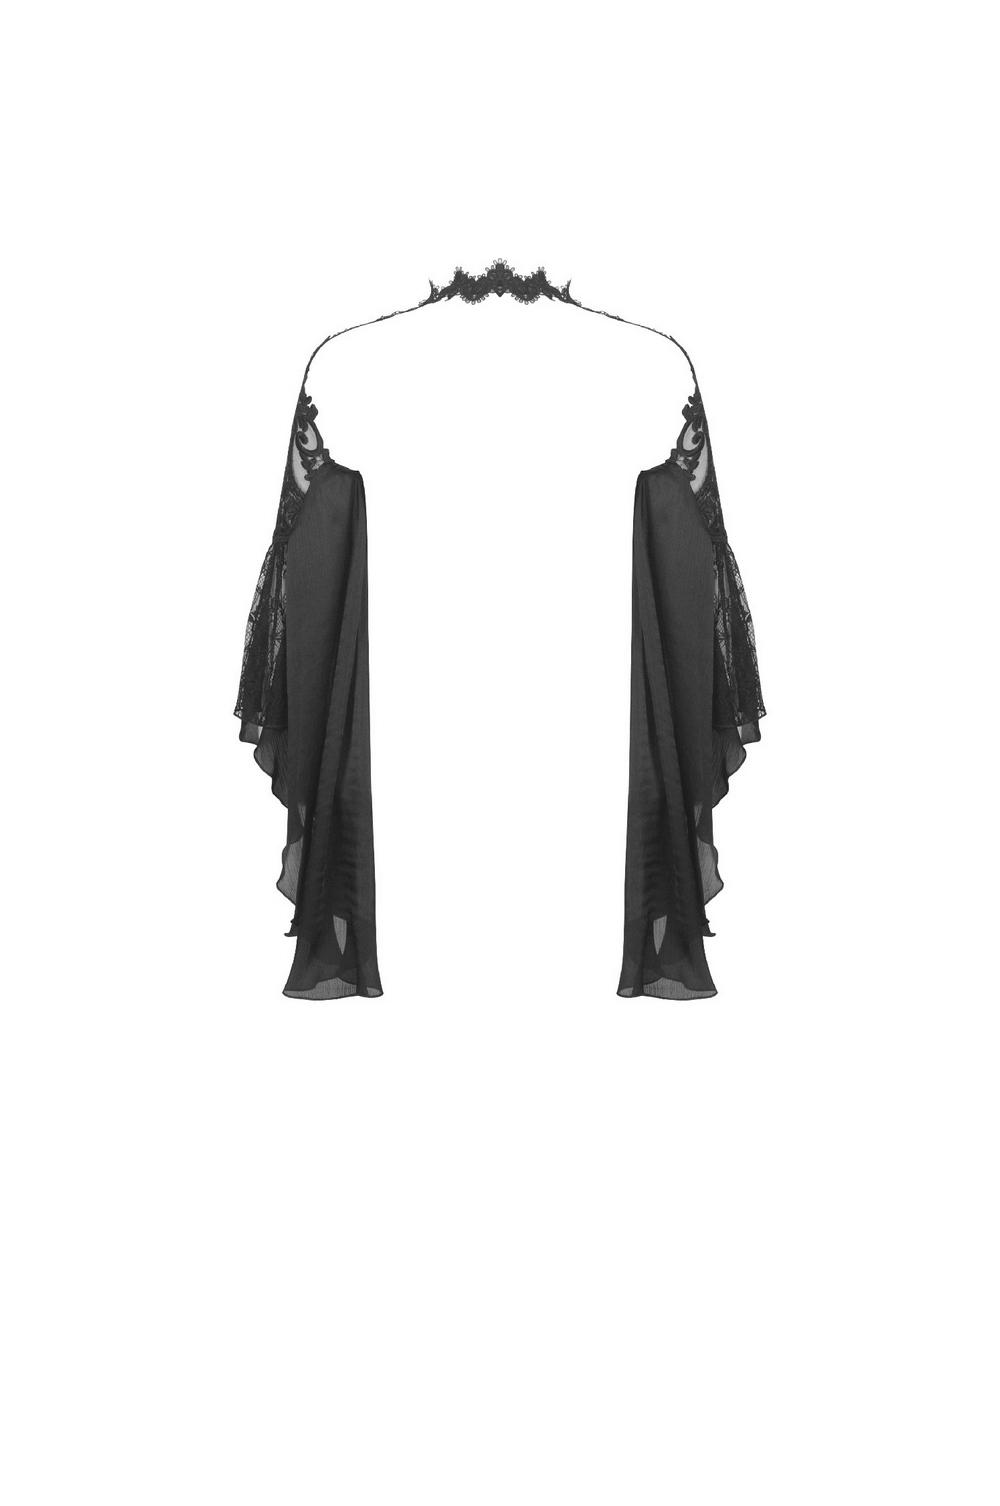 Gothic Black Lace Halter Cape with Bell Sleeves